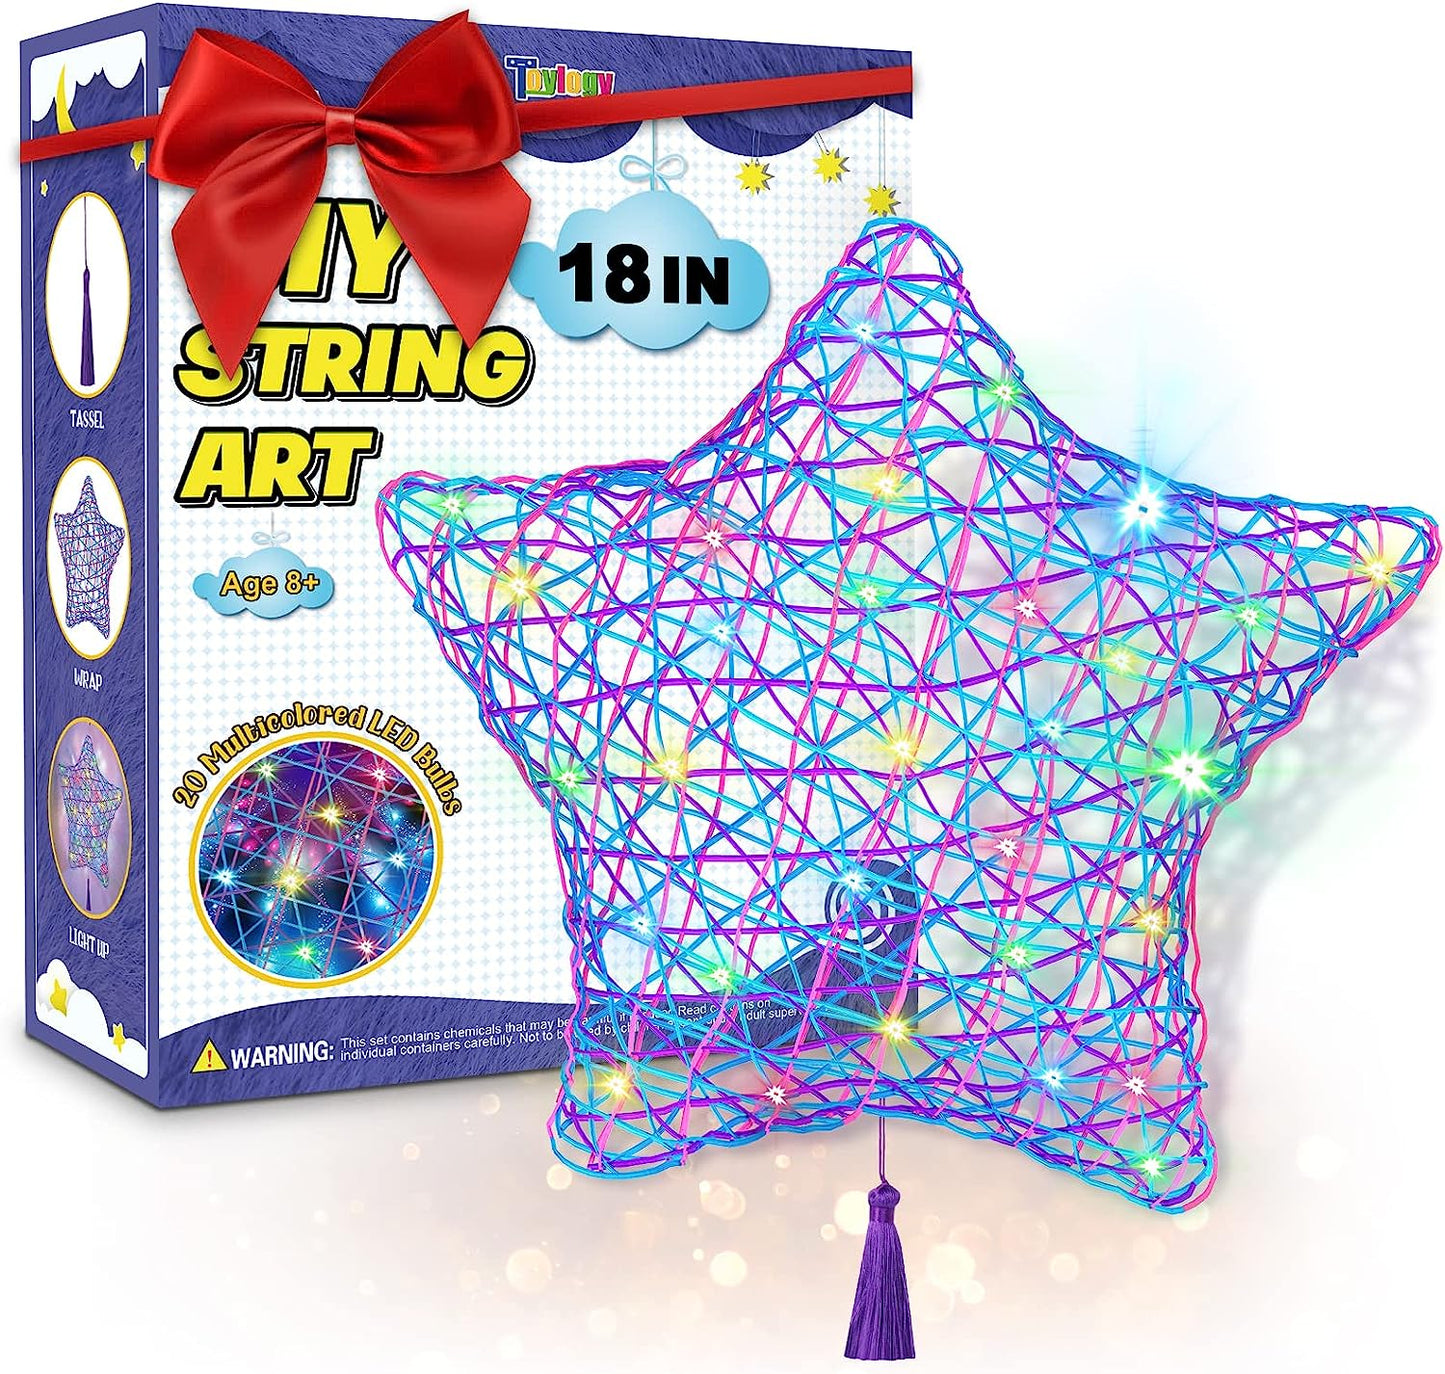 3D String Art Kit for Kids - Upgraded Makes a Light-Up Star Lantern with Multi-Colored Lights - Crafts for Girls and Boys - Kids Gifts - DIY Arts & Craft Kits for 8, 9, 10, 11, 12 Year Old Girl